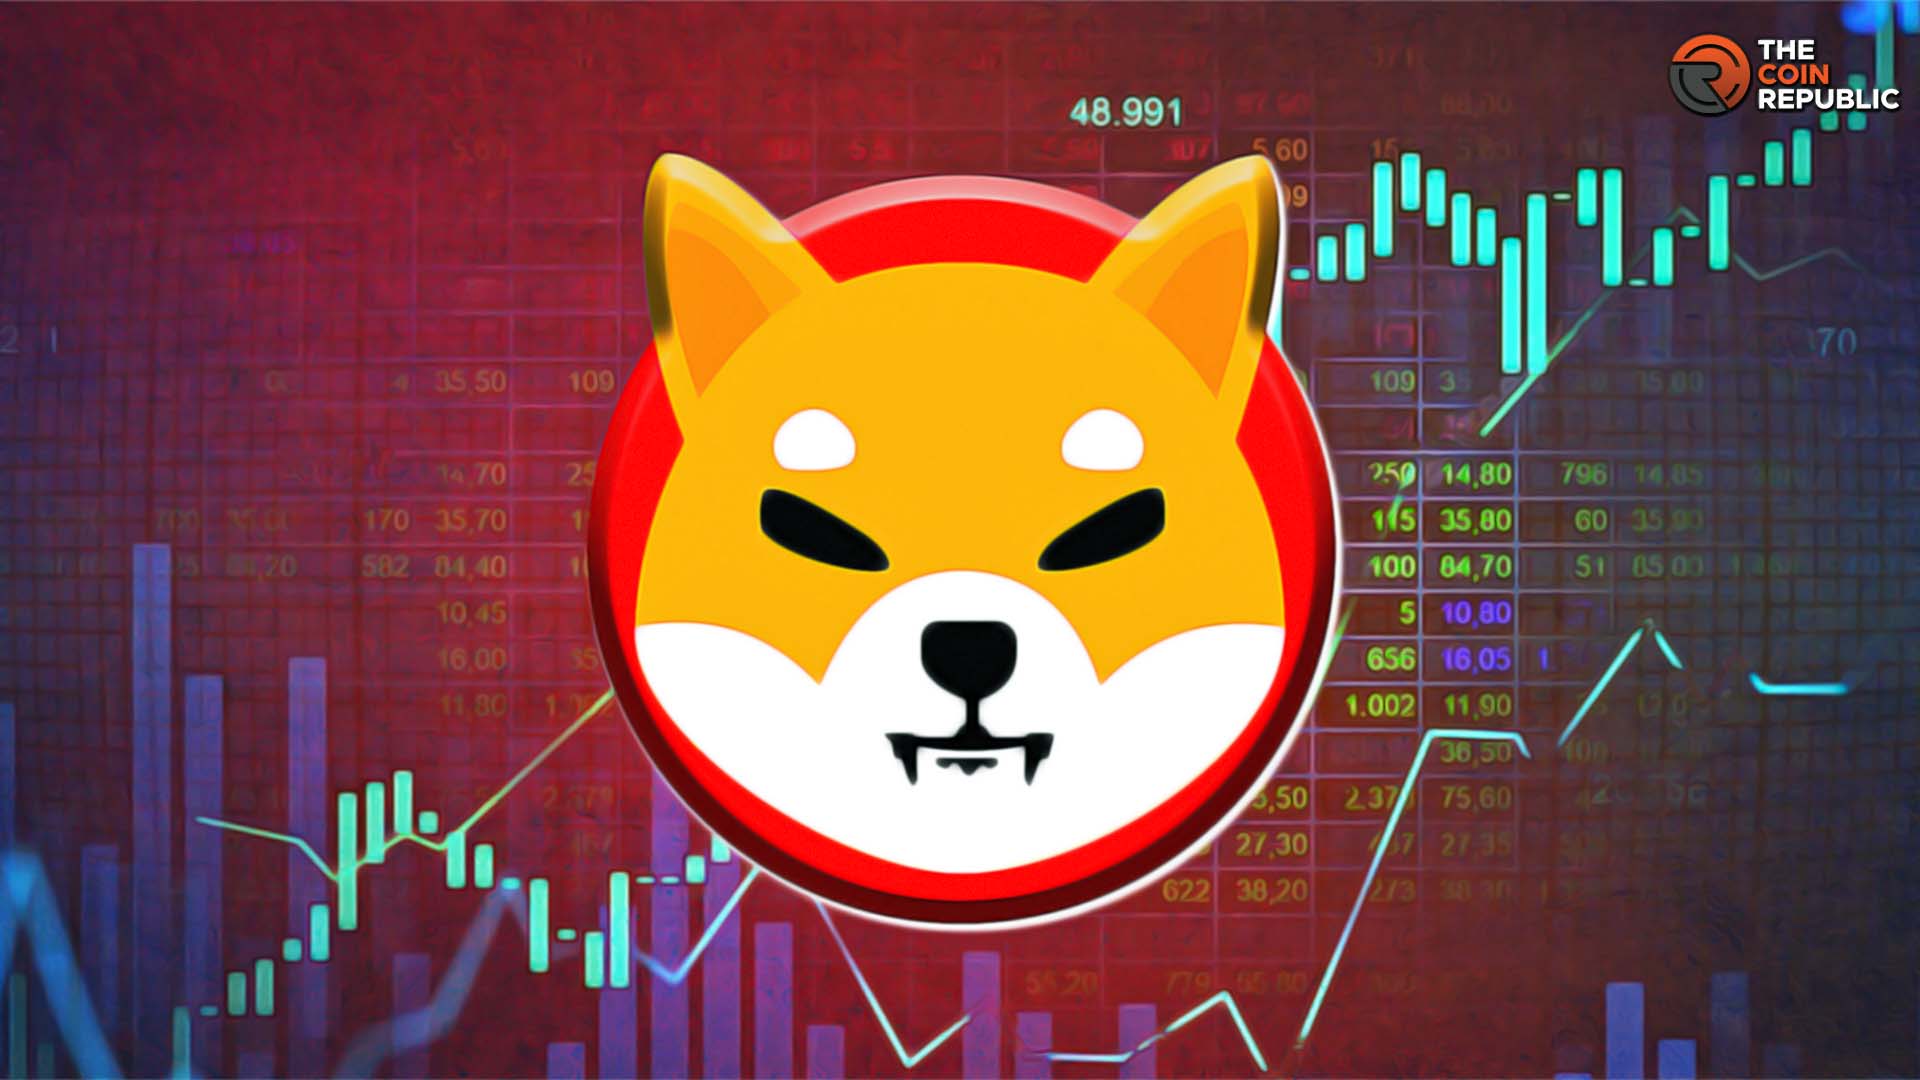 Shiba Inu Price Prediction: Will SHIB Price Outperform in August?